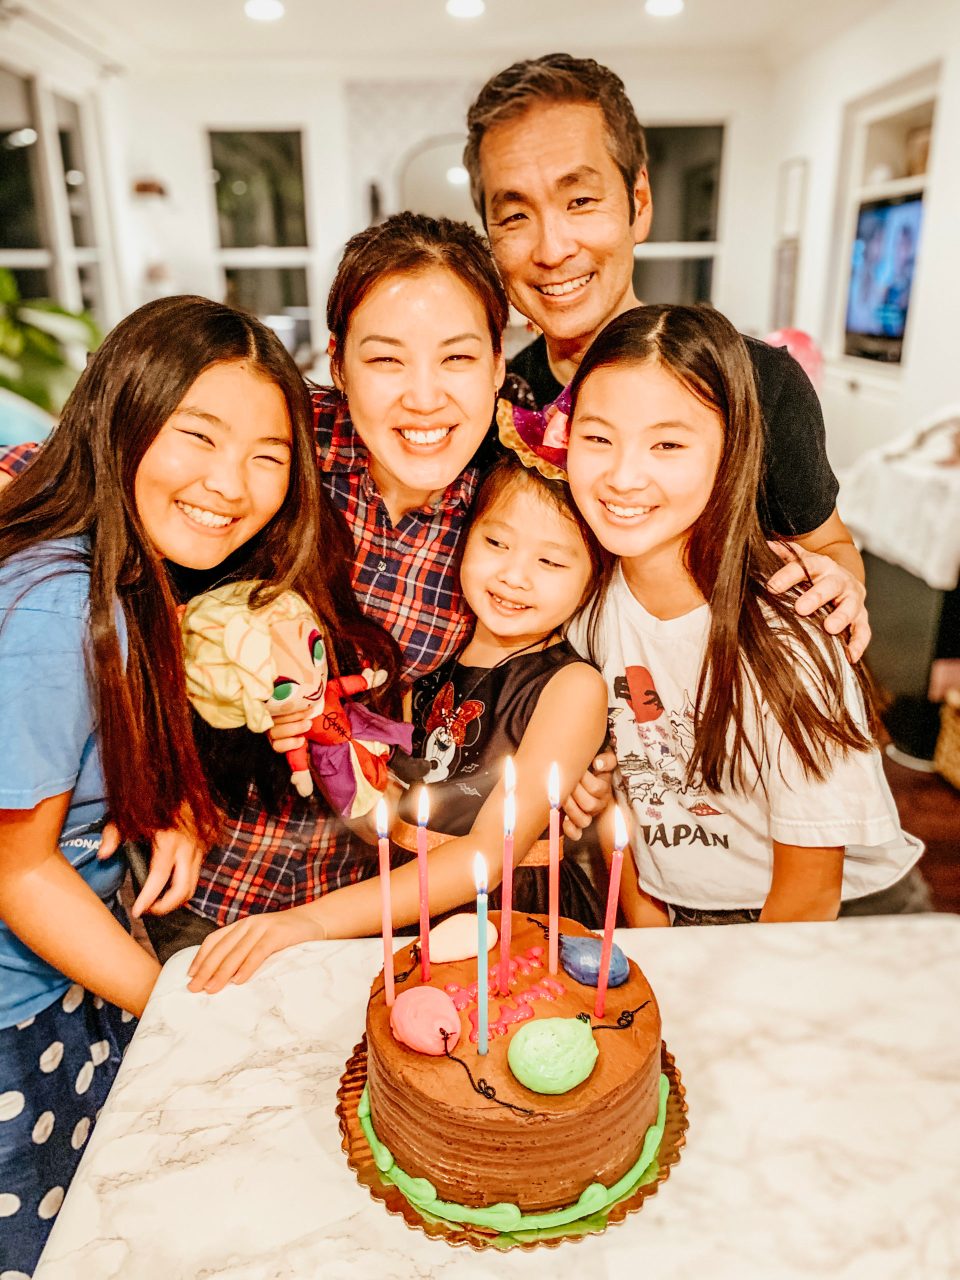 A sweet family moment, all five Yokotas gathered around a cake for Natalie's birthday